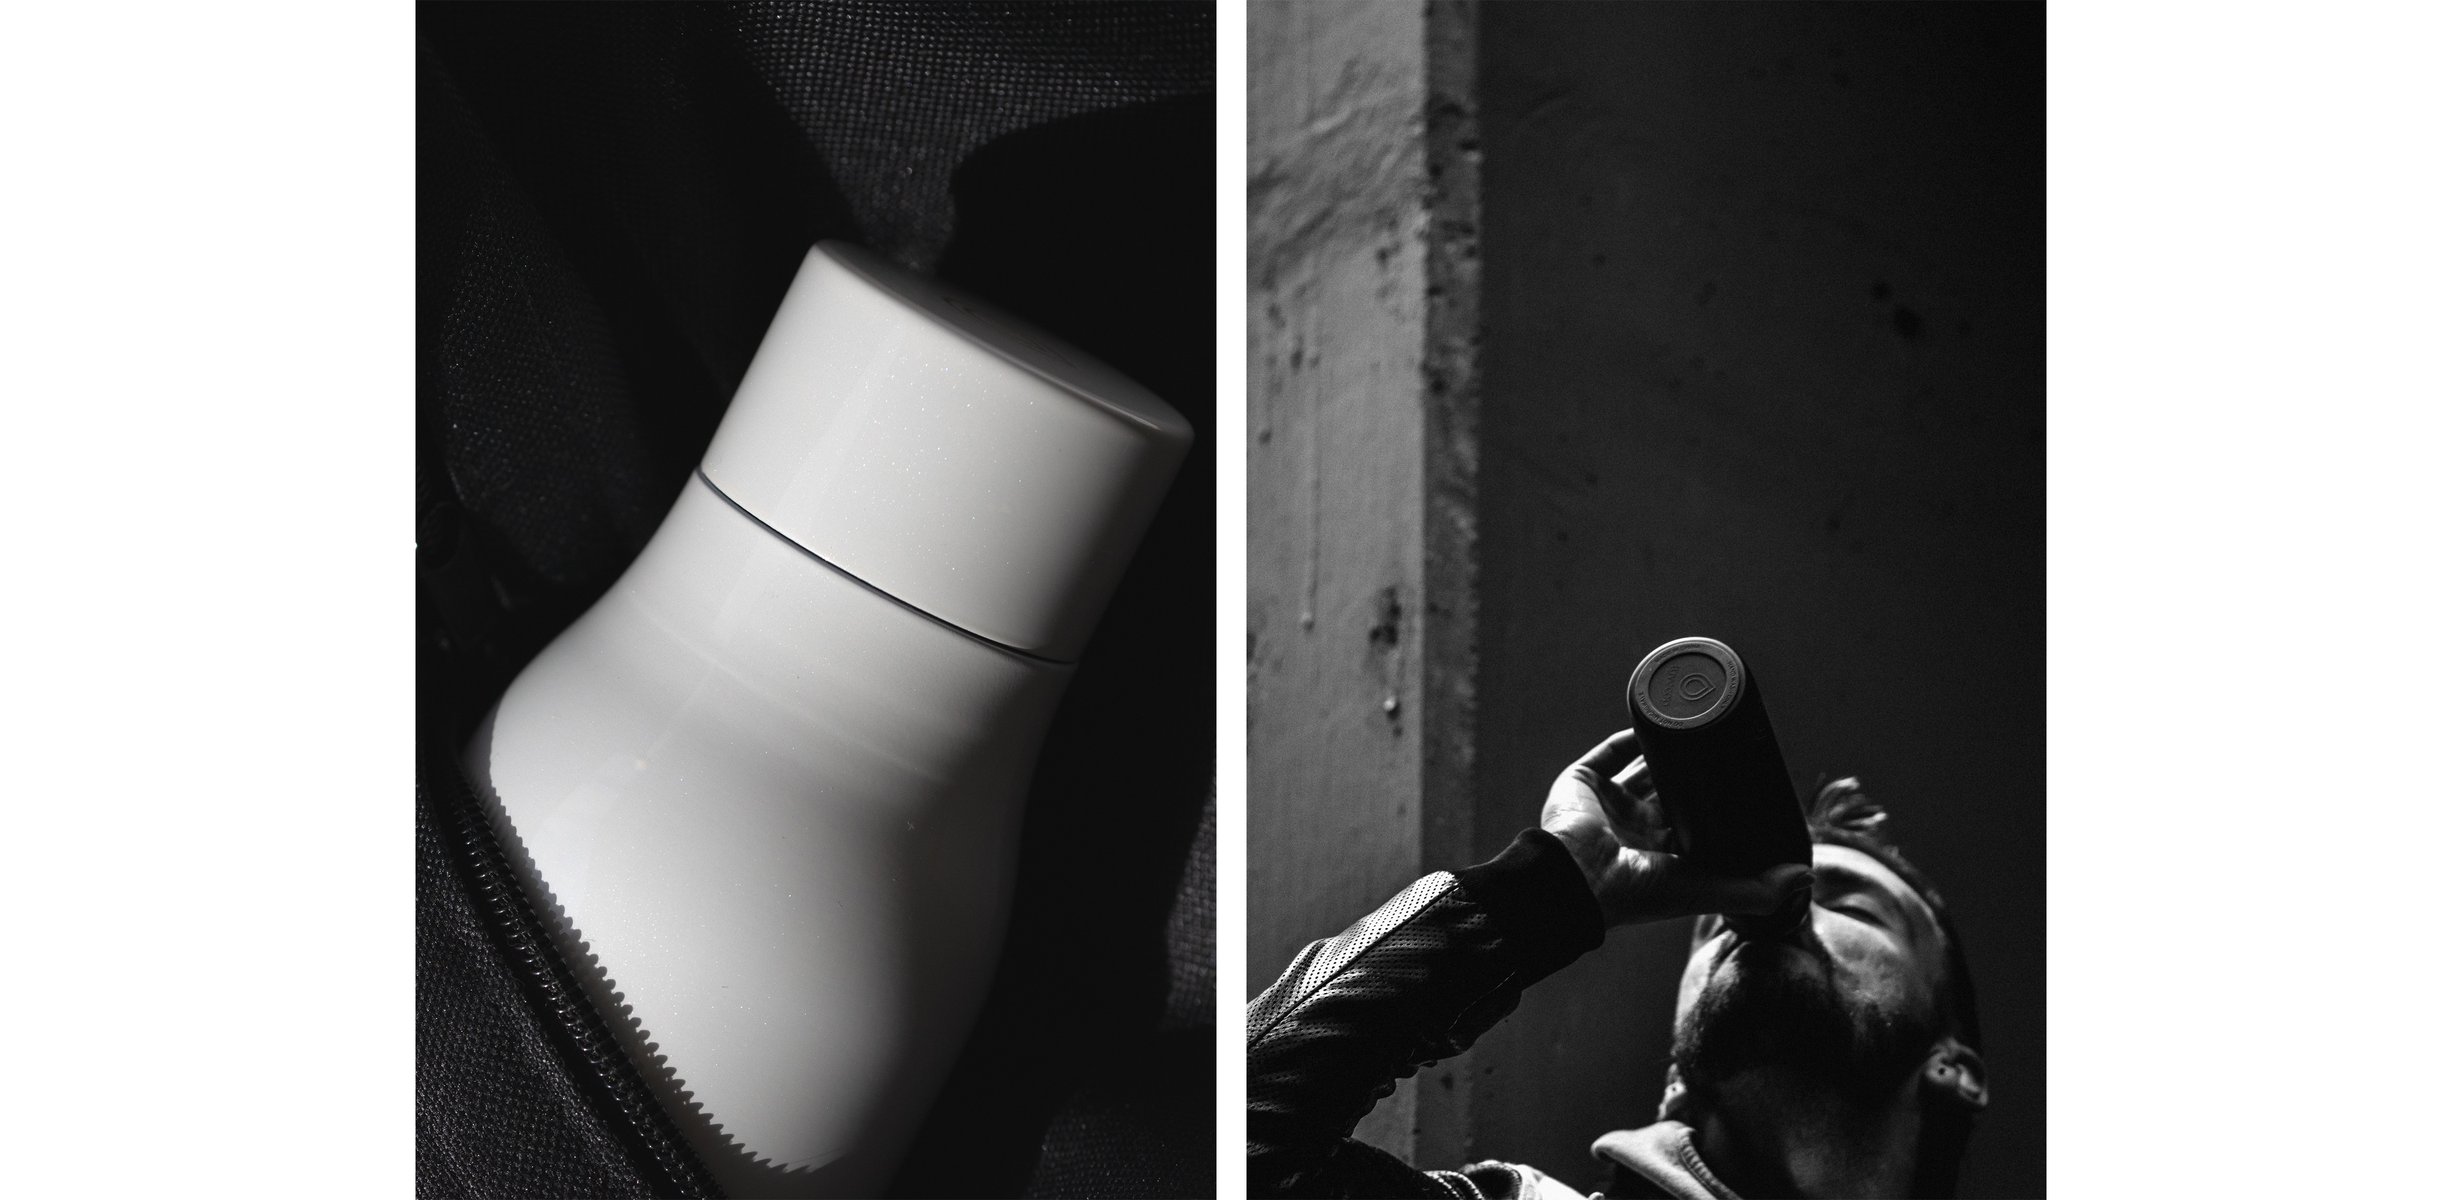  Diptych:

Left image: a black and white image of the top and lid of a sleek white water bottle peeking out of a black bag with a thick black zipper.

Right image: a black and white photo of a soccer player sitting on a concrete window ledge in an alley, drinking out of a sleek, black water bottle. by Sydney SG